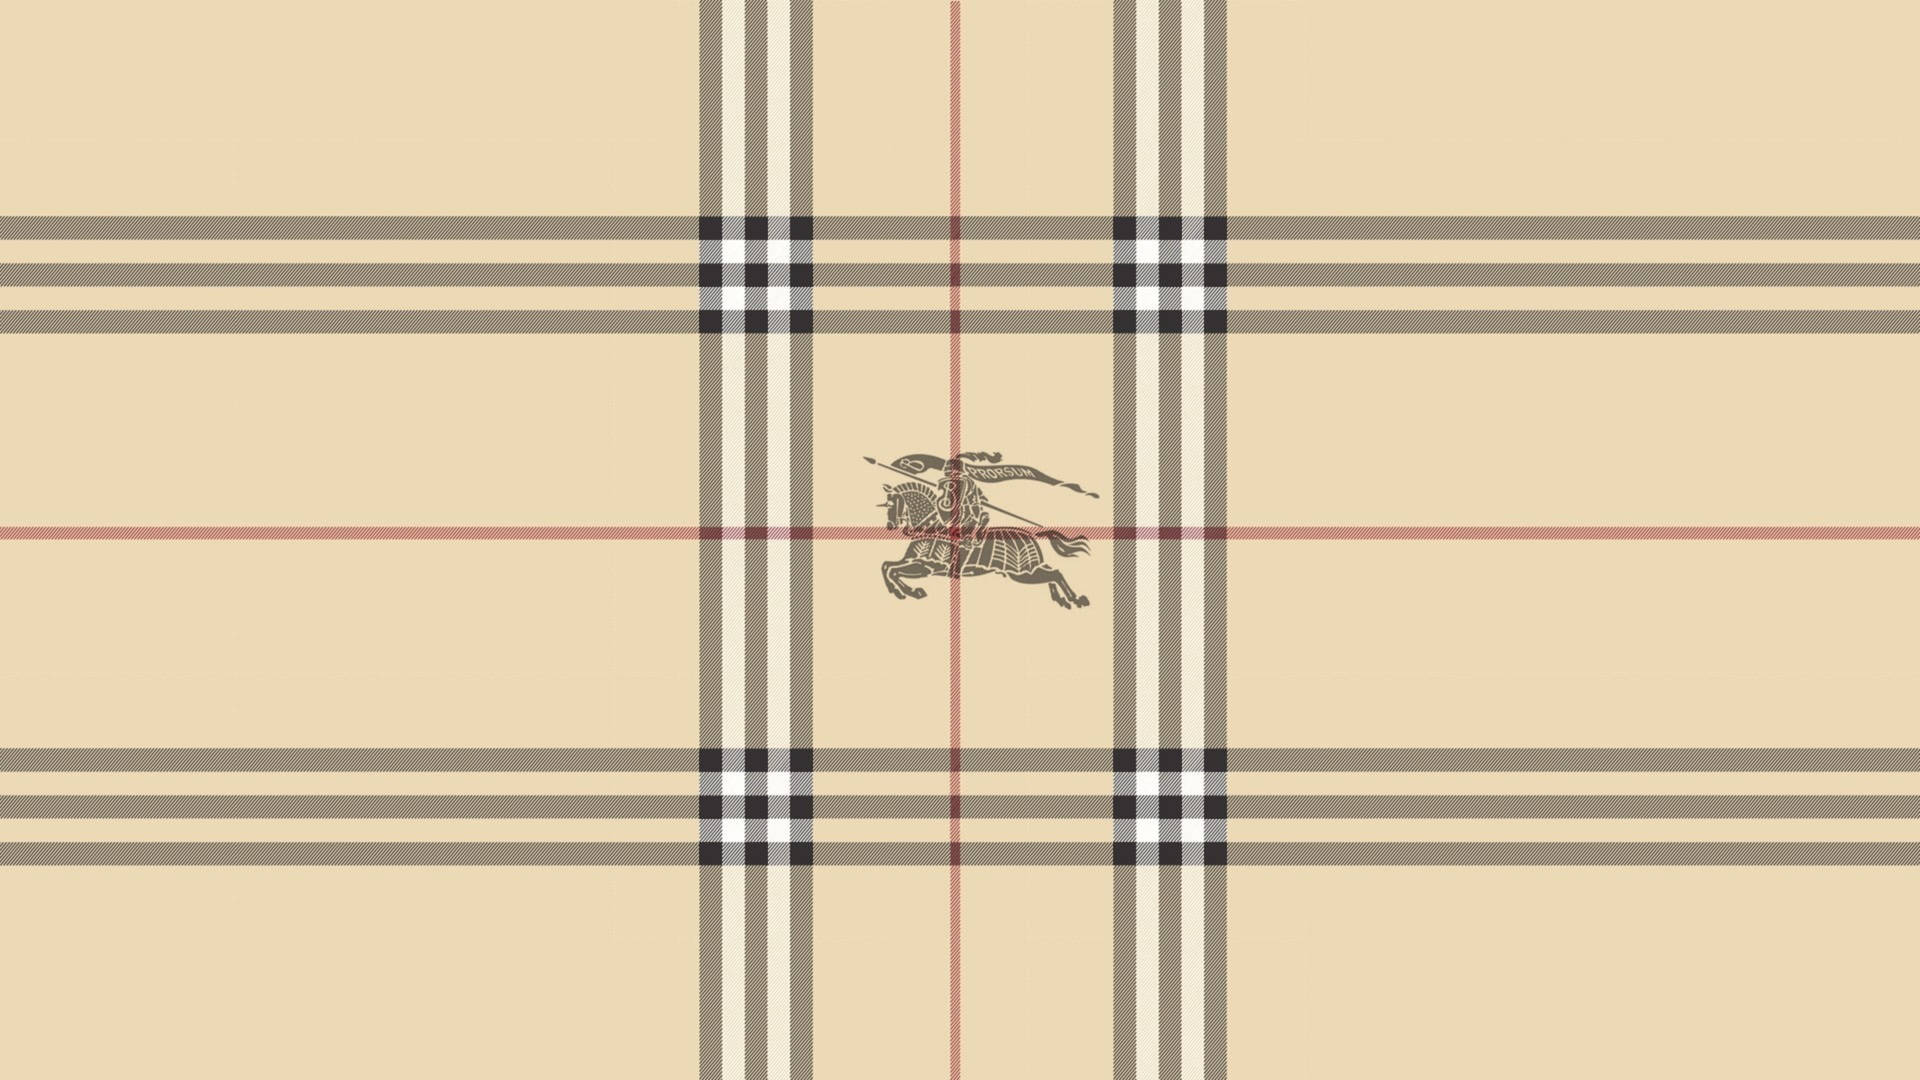 Aggregate more than 85 burberry wallpaper